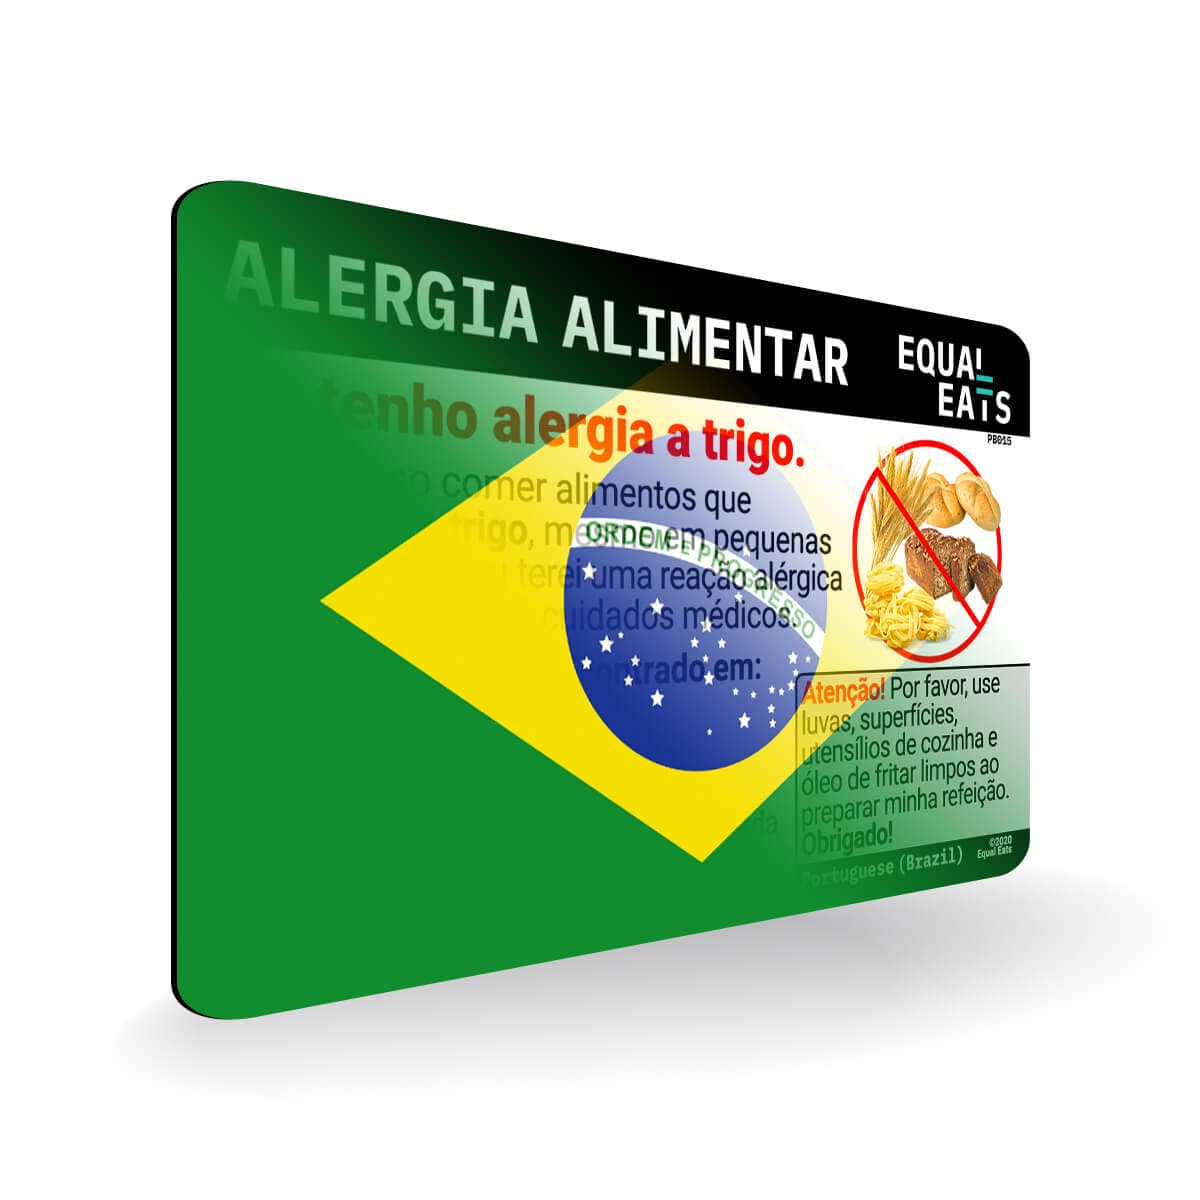 Wheat Allergy in Portuguese. Wheat Allergy Card for Brazil